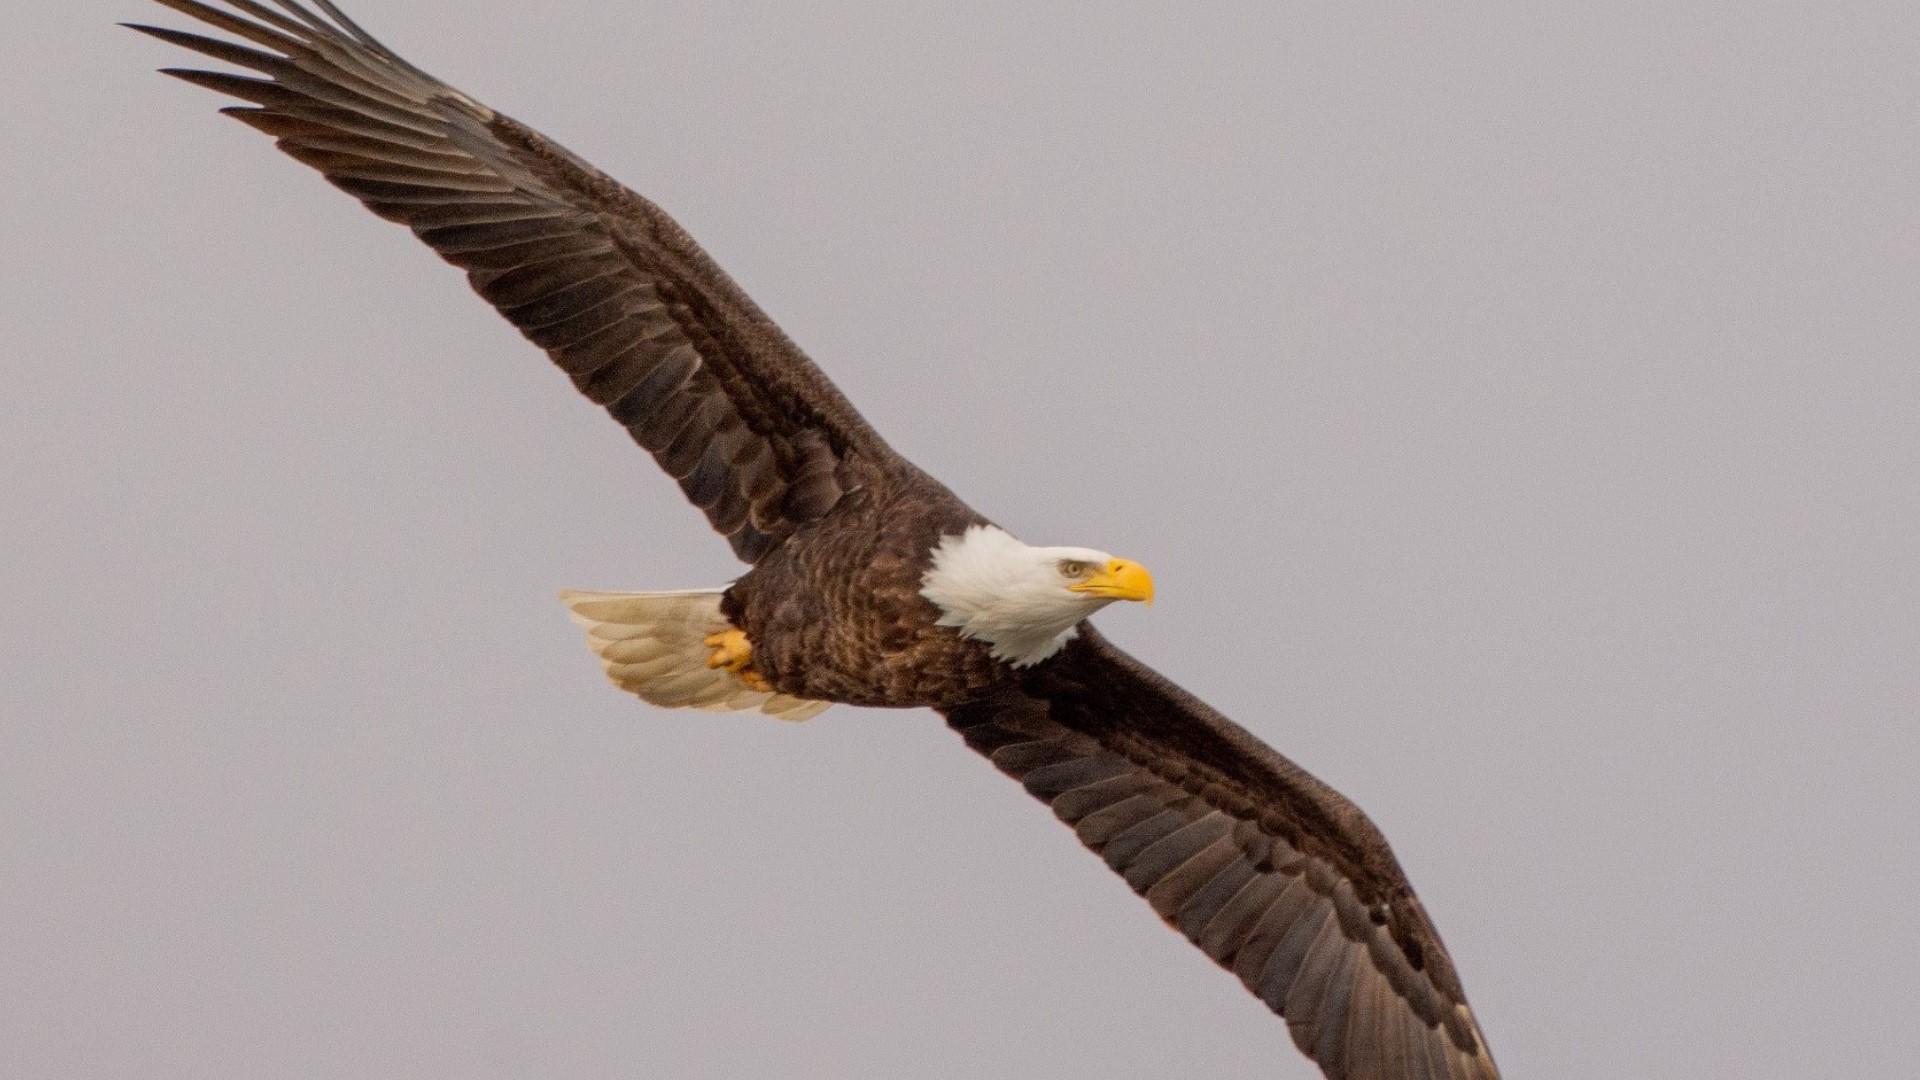 The recovery of the bald eagle is one of the greatest conservation success stories in Indiana,” said the Indiana Department of Natural Resources in a statement.